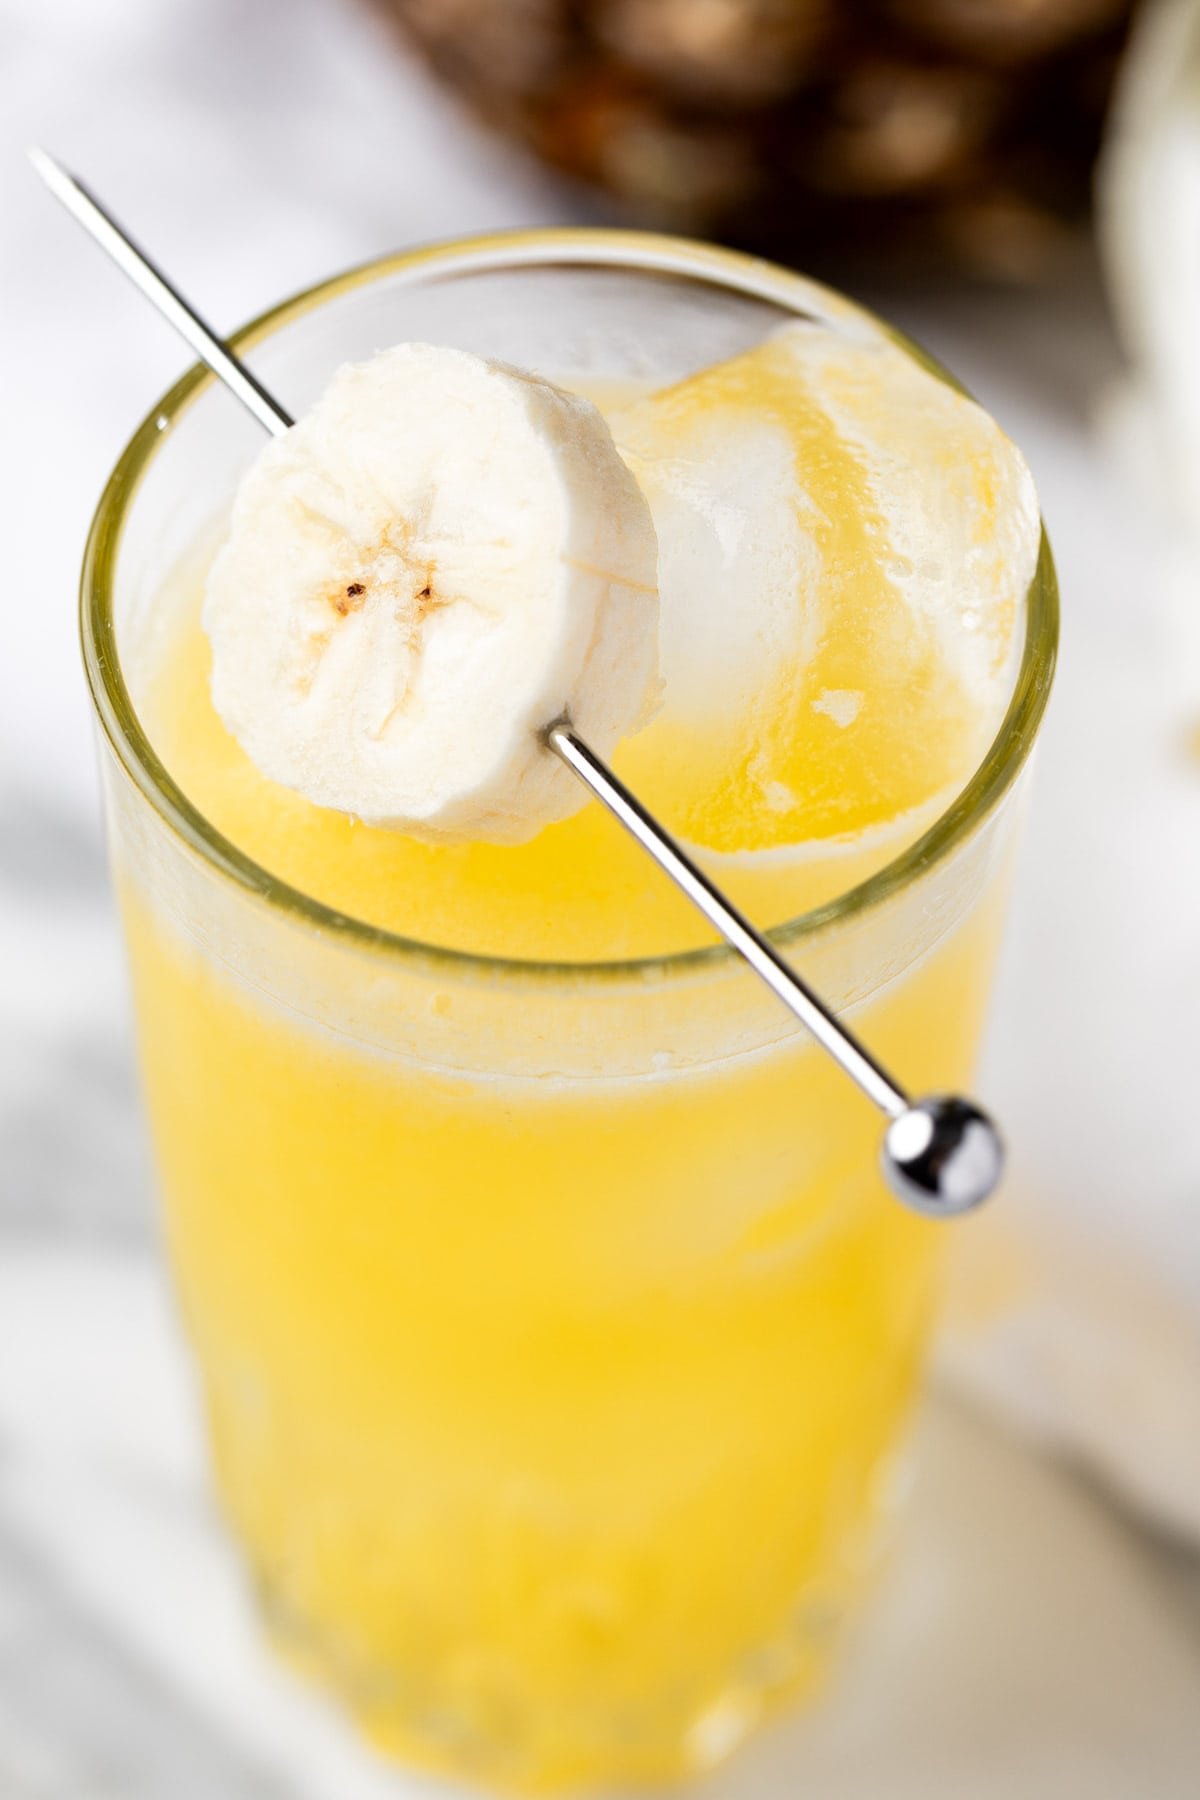 A banana rum cocktail garnished with banana slices.